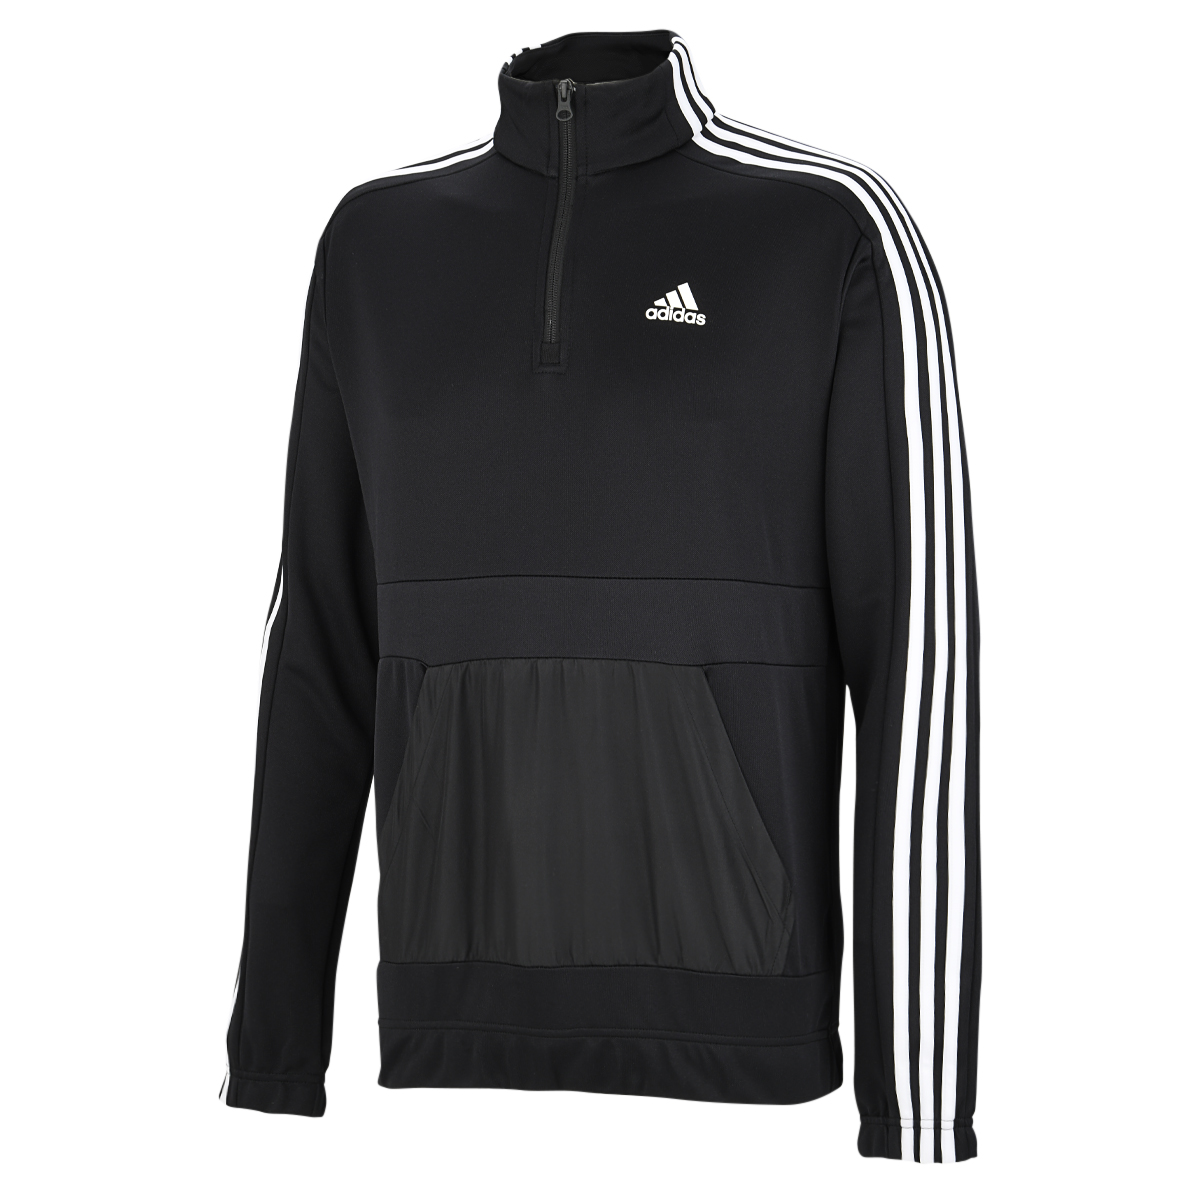 Conjunto adidas Tricot,  image number null